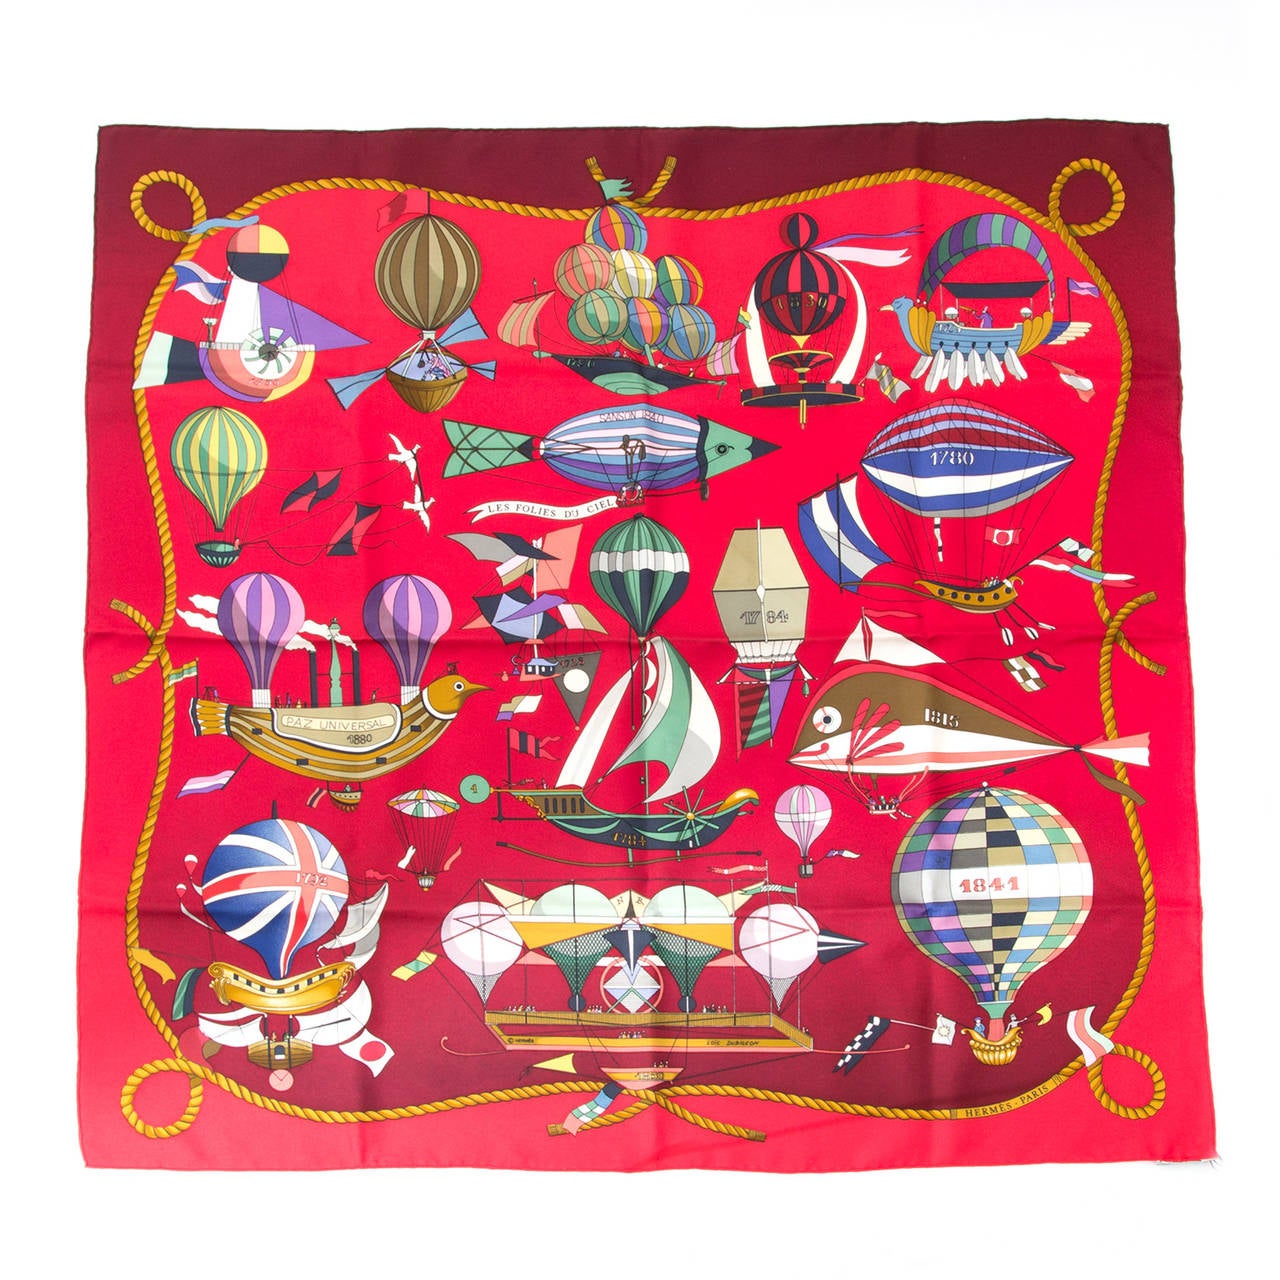 This Hermès carré is a silk scarf designed by Loïc Dubigeon, namde 'Les Folies Du Ciel' depicting airballoons and other 19th century aircrafts. In beautiful deep ombre red.